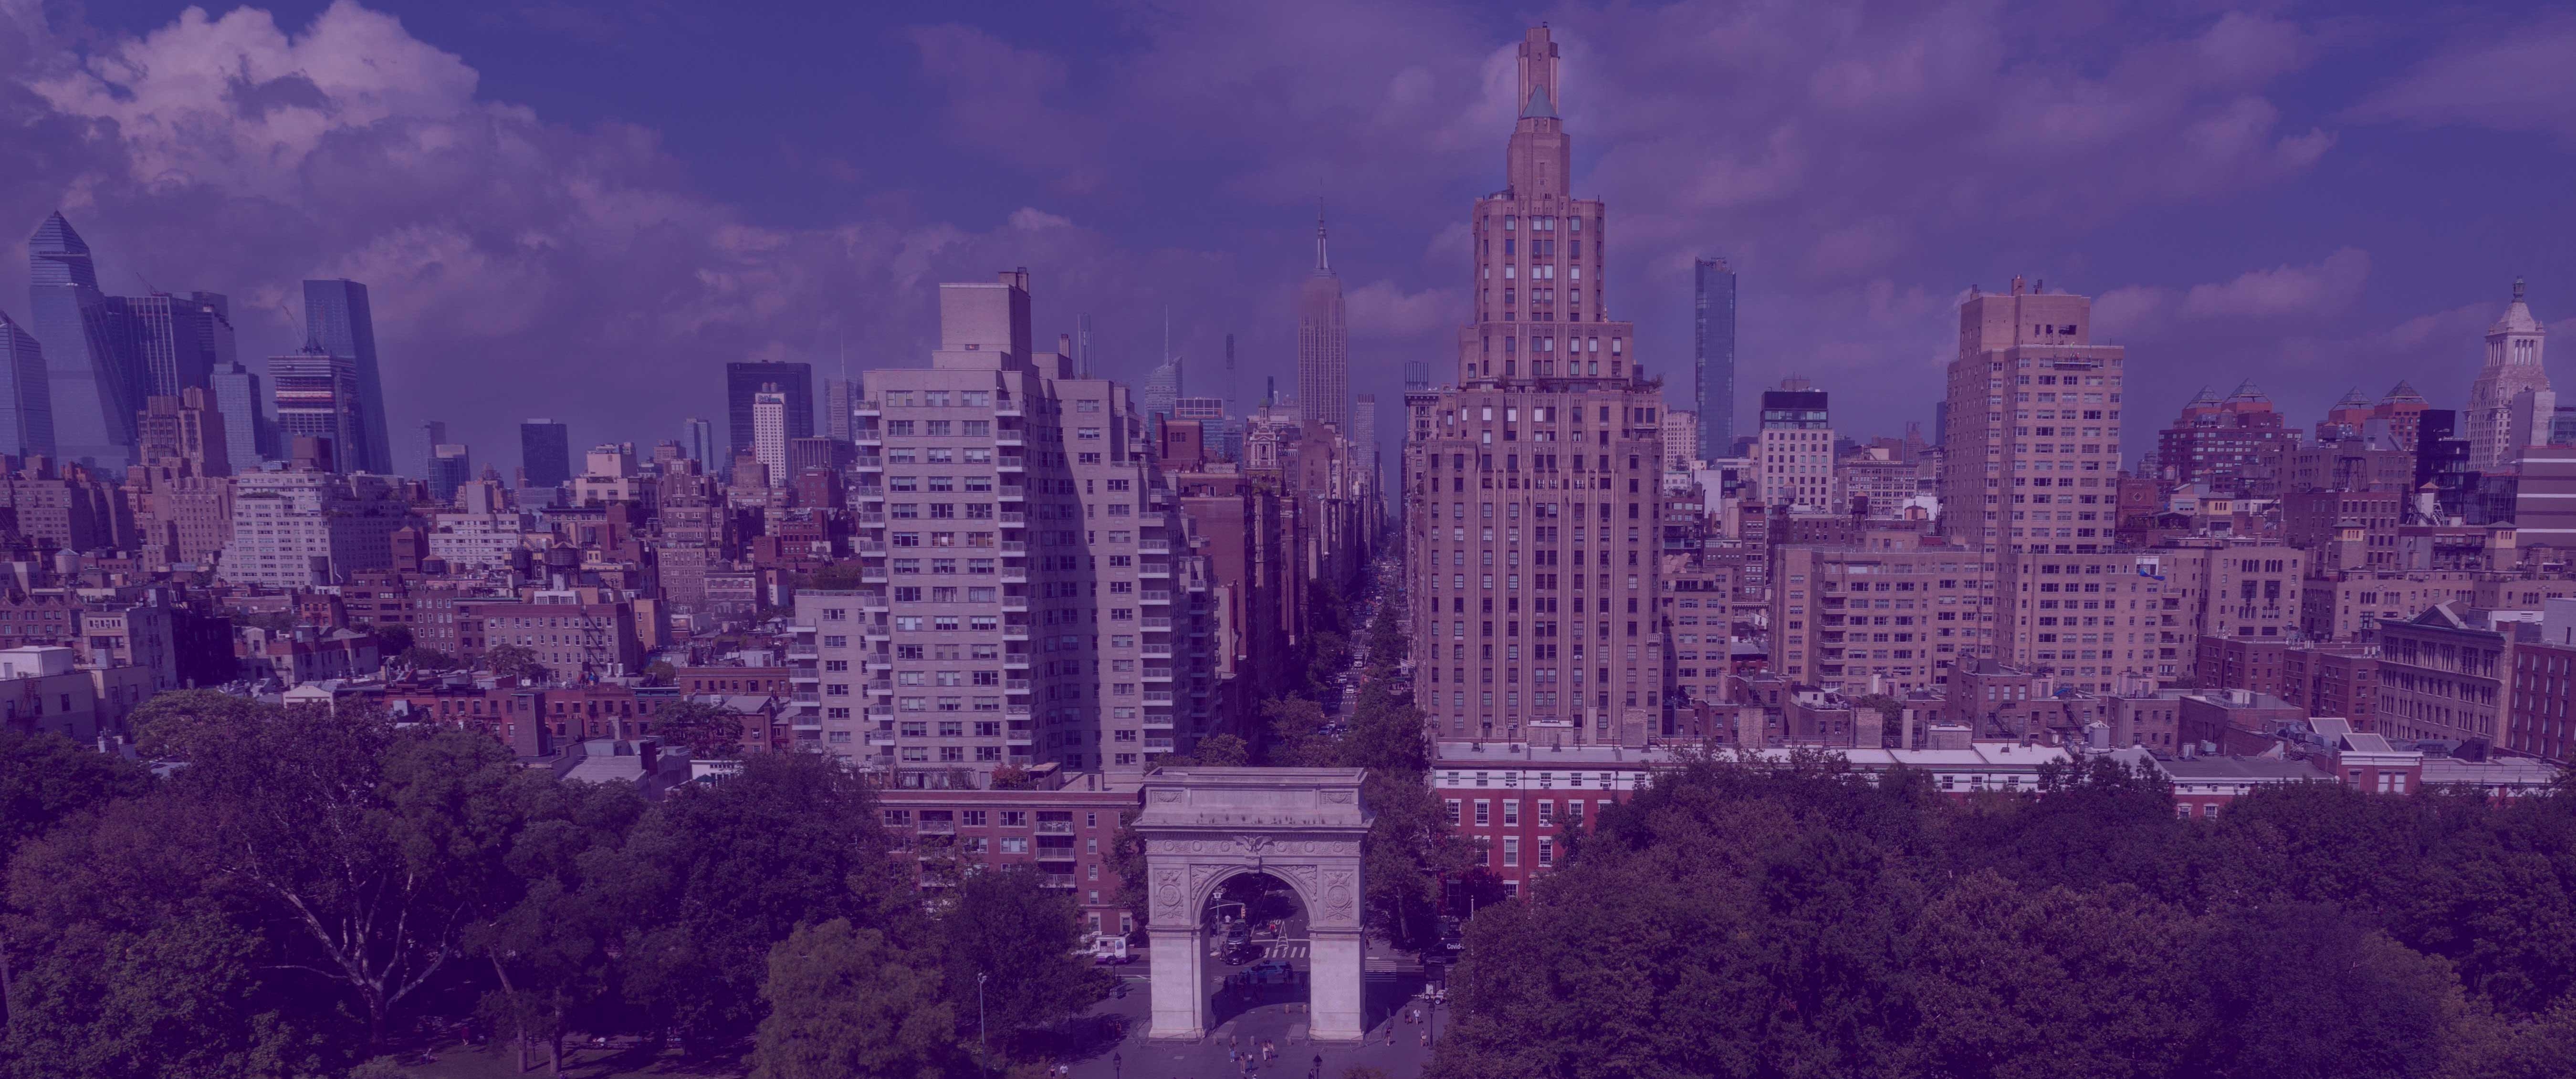 Wide shot of Washington Square Park with a purple overlay